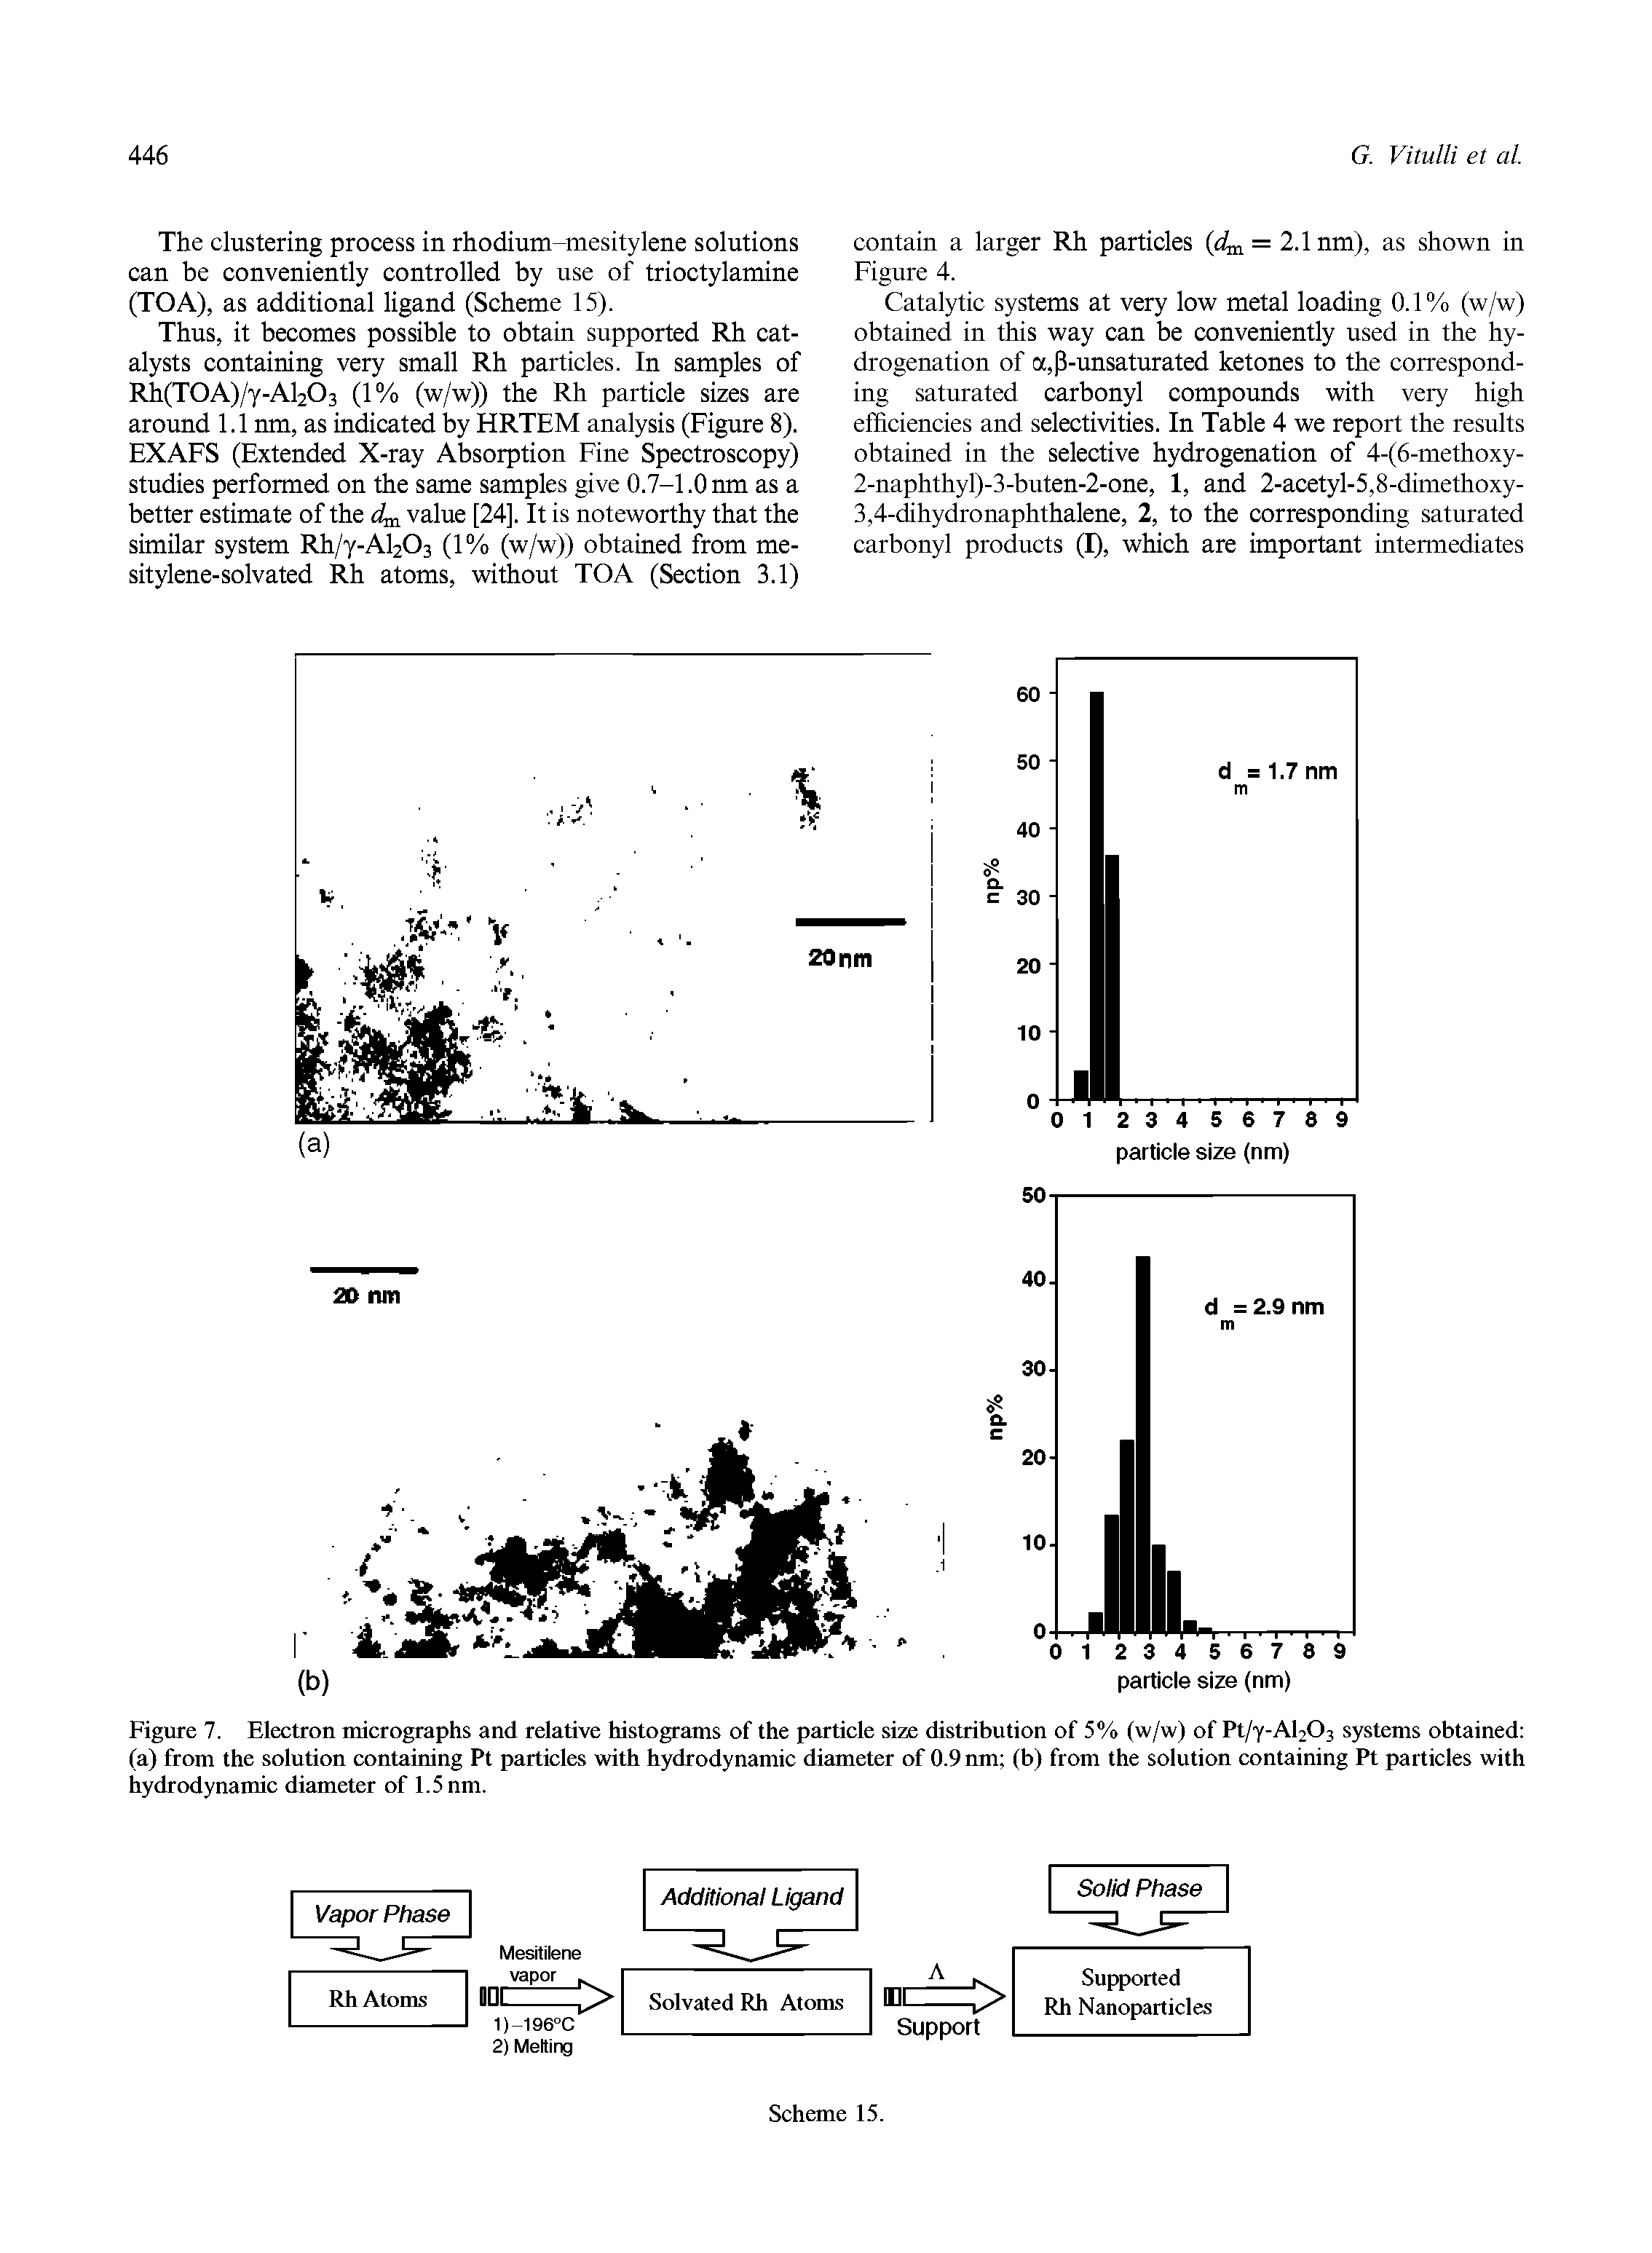 Figure 7. Electron micrographs and relative histograms of the particle size distribution of 5% (w/w) of Pt/y-Al203 systems obtained (a) from the solution containing Pt particles with hydrodynamic diameter of 0.9 nm (b) from the solution containing Pt particles with hydrodynamic diameter of 1.5 nm.